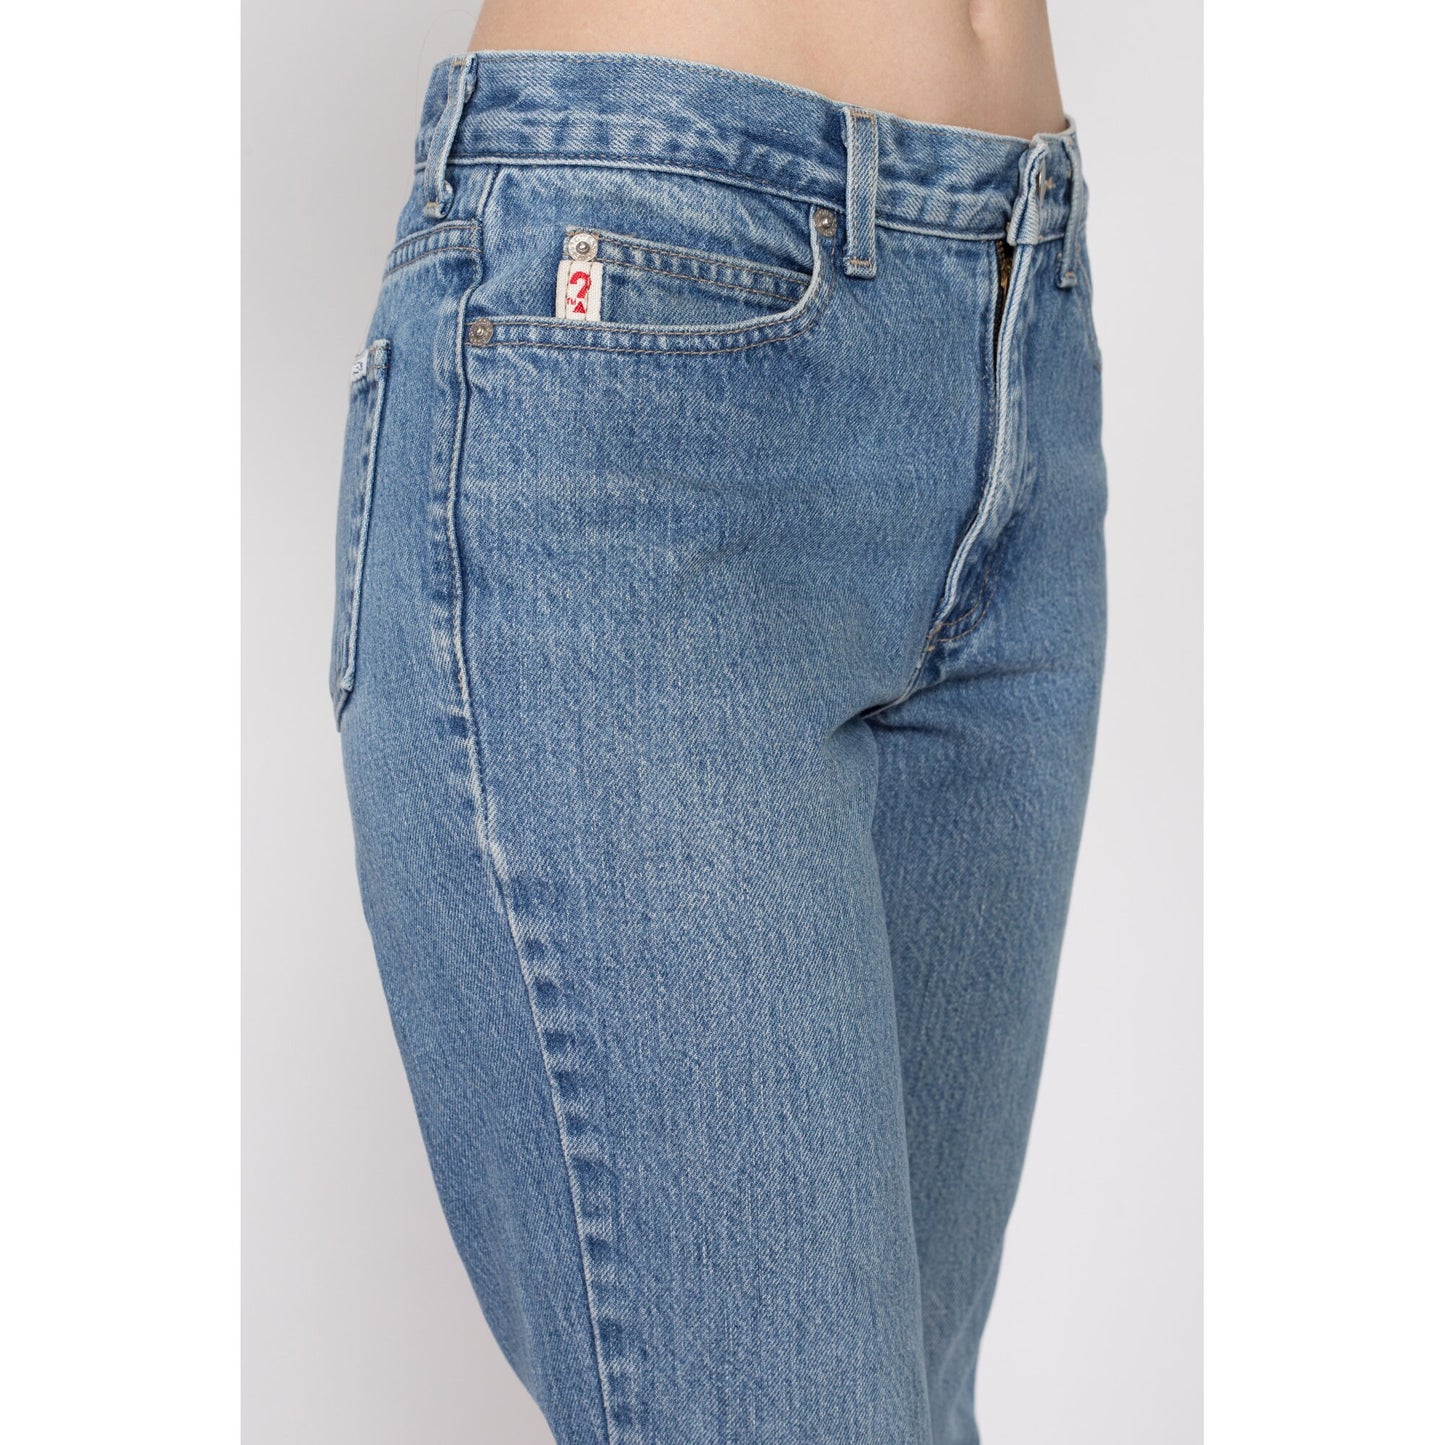 Small 90s Guess Mid Rise Straight Leg Jeans | Vintage Medium Wash Denim Mom Jeans